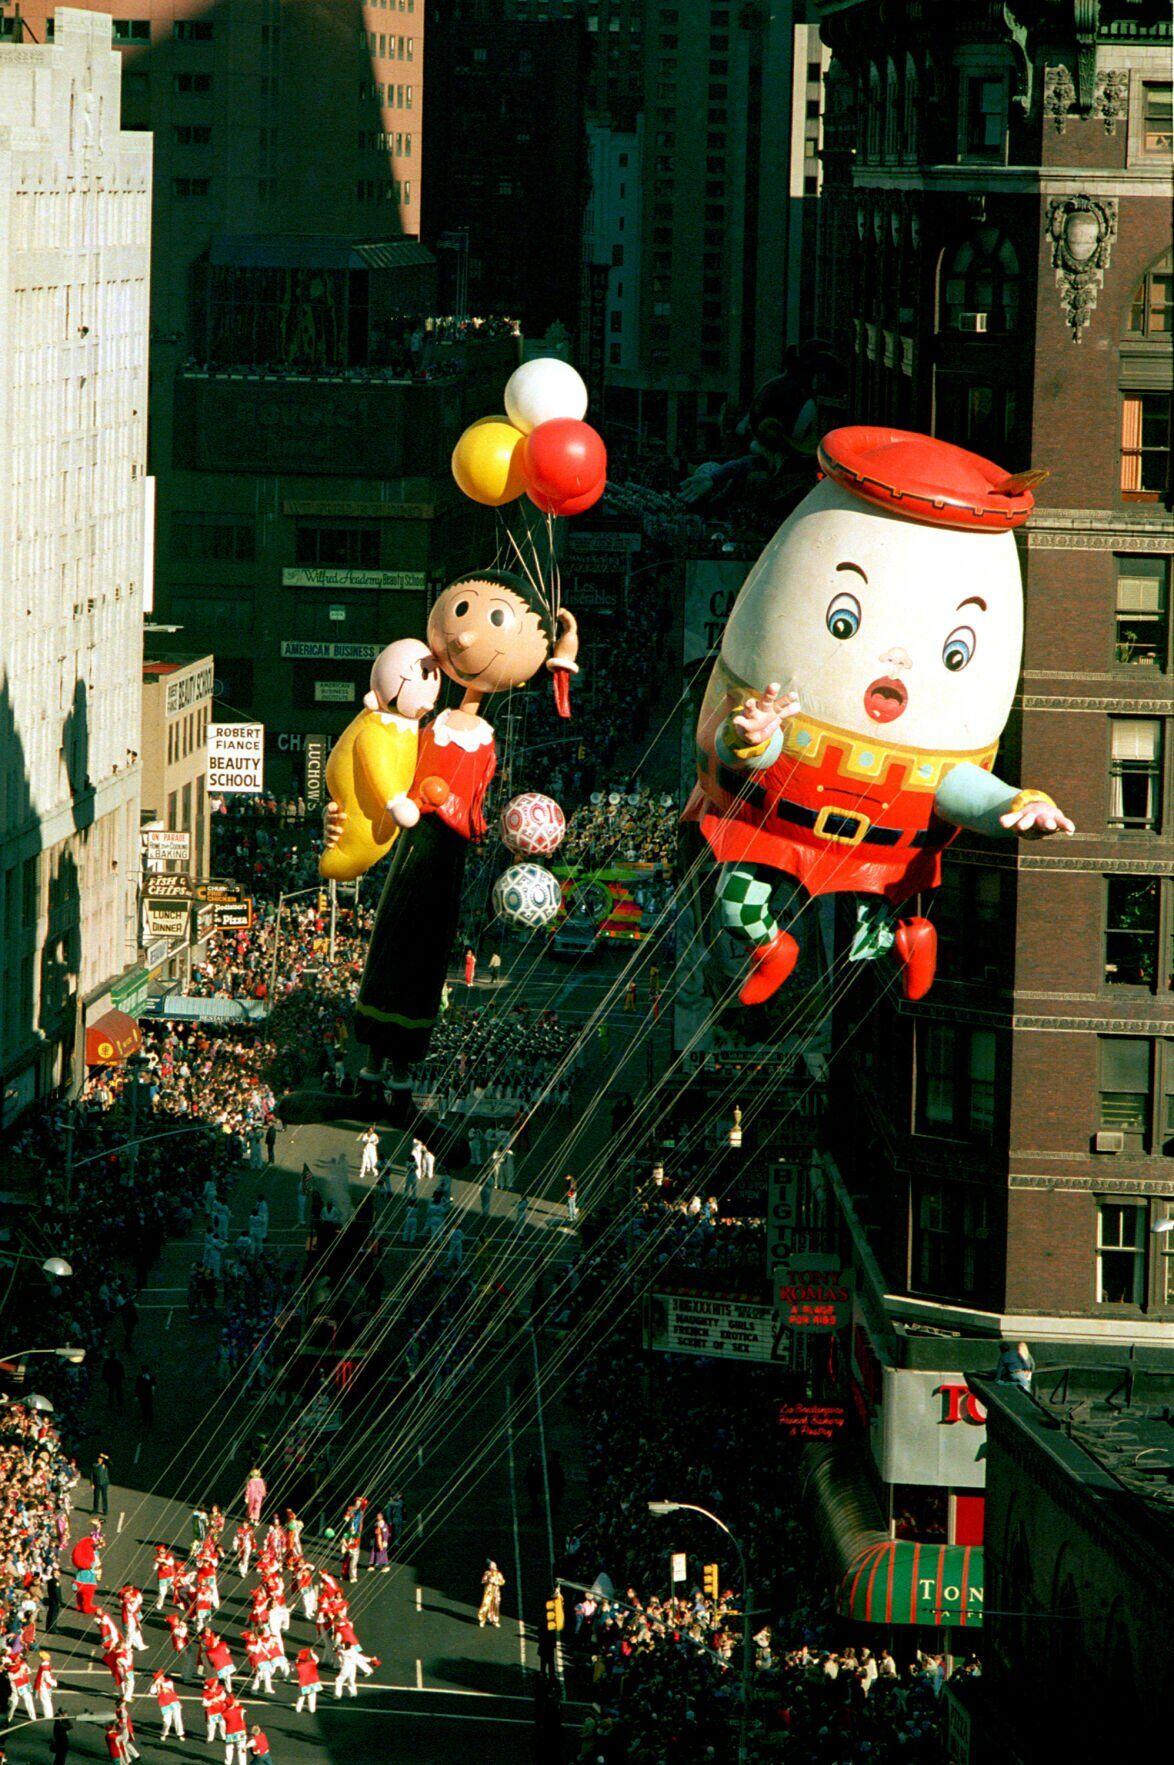 The most infamous balloon mishaps from the Macy's Thanksgiving Day